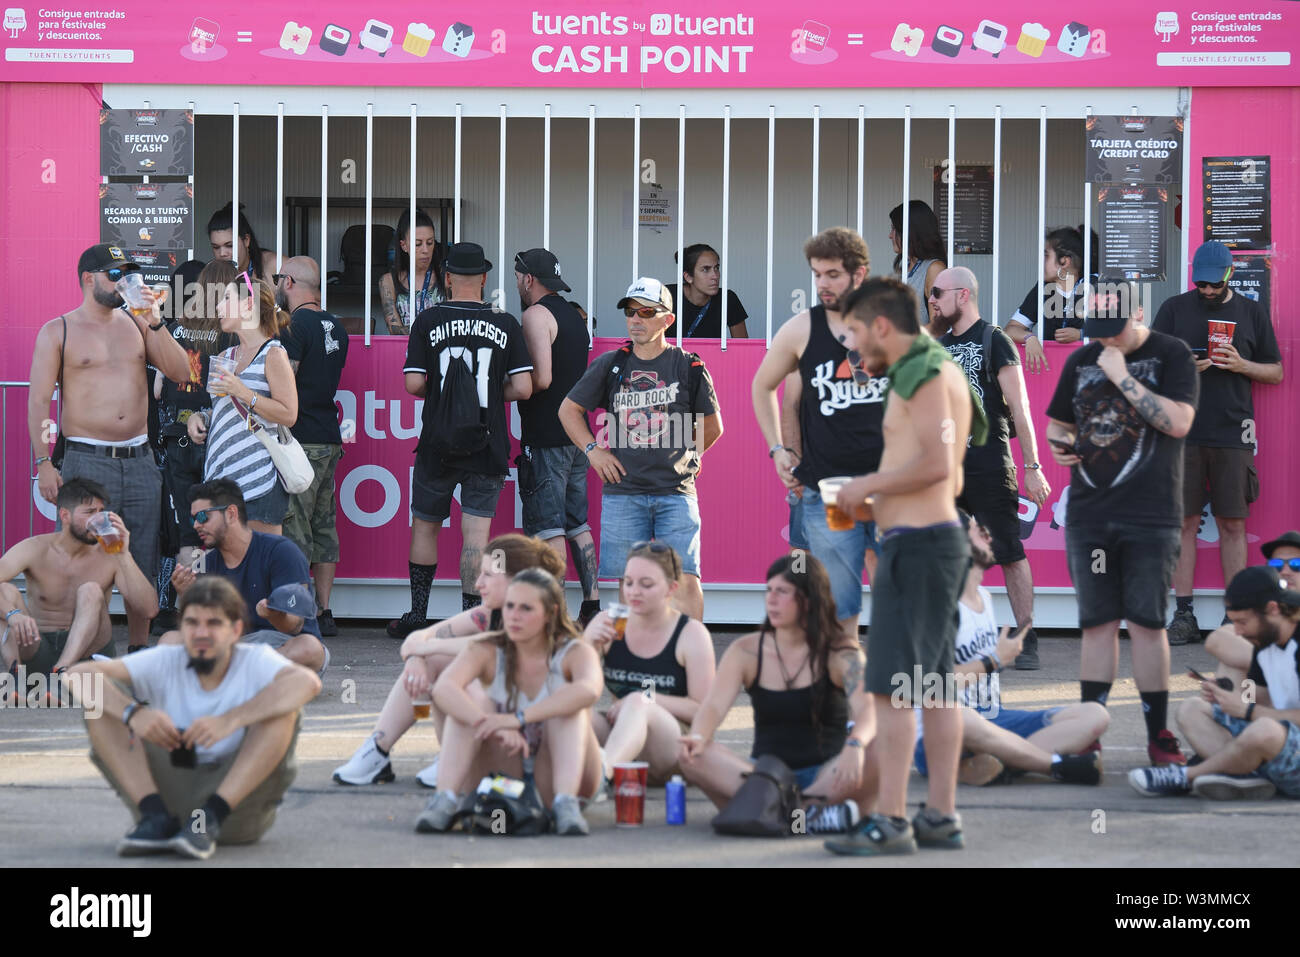 MADRID - JUN 30: People at the Tuenti Cash Point at Download (heavy metal music festival) on June 30, 2019 in Madrid, Spain. Stock Photo